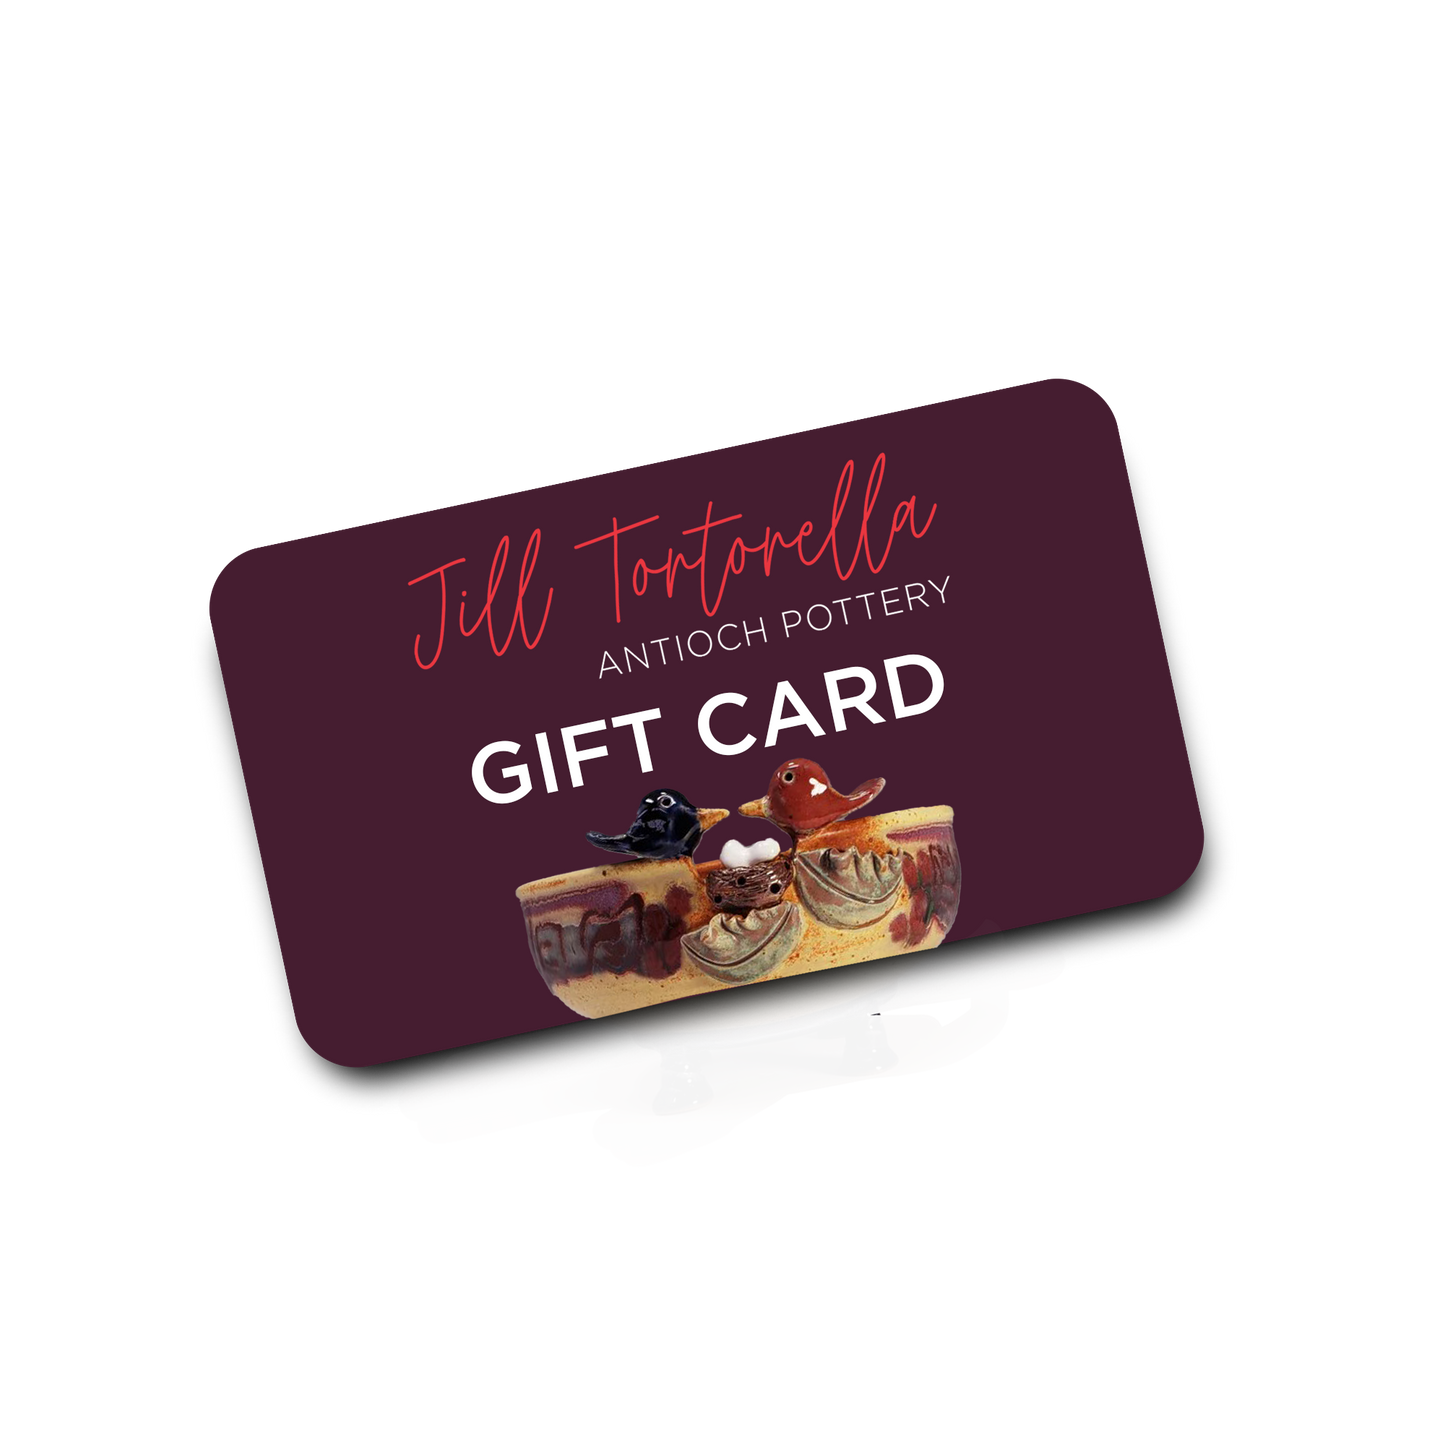 Antioch Pottery Gift Card